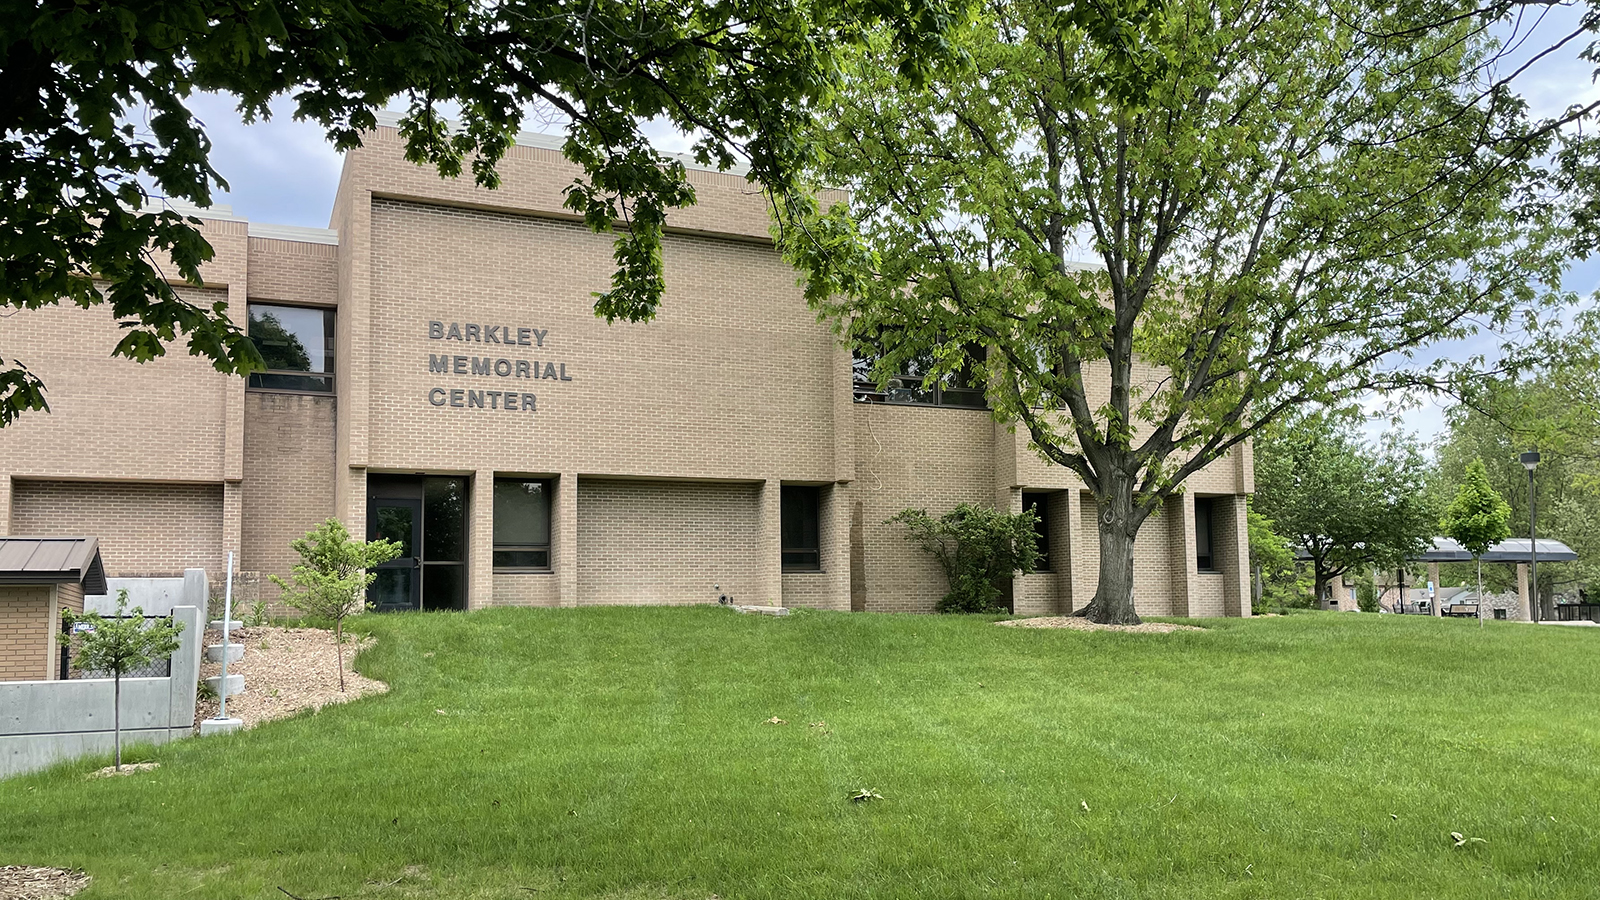 The Barkley Memorial Center on the University of Nebraska-Lincoln's East Campus is home to the Department of Special Education and Communication Disorders.